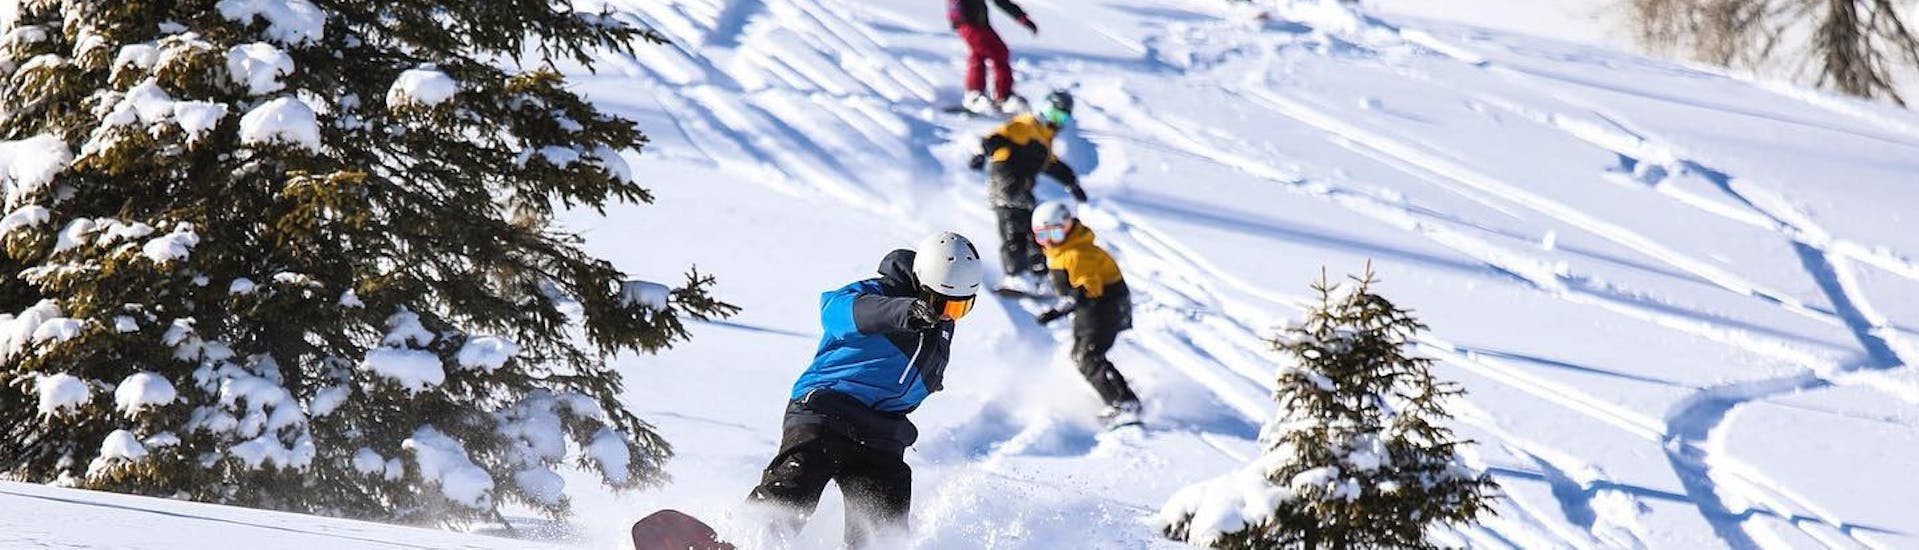 A group of kids riding down the slopes of Madonna di Campiglio during the Snowboarding Lessons for Kids & Adults of All Levels with Scuola di Snowboard Zebra.